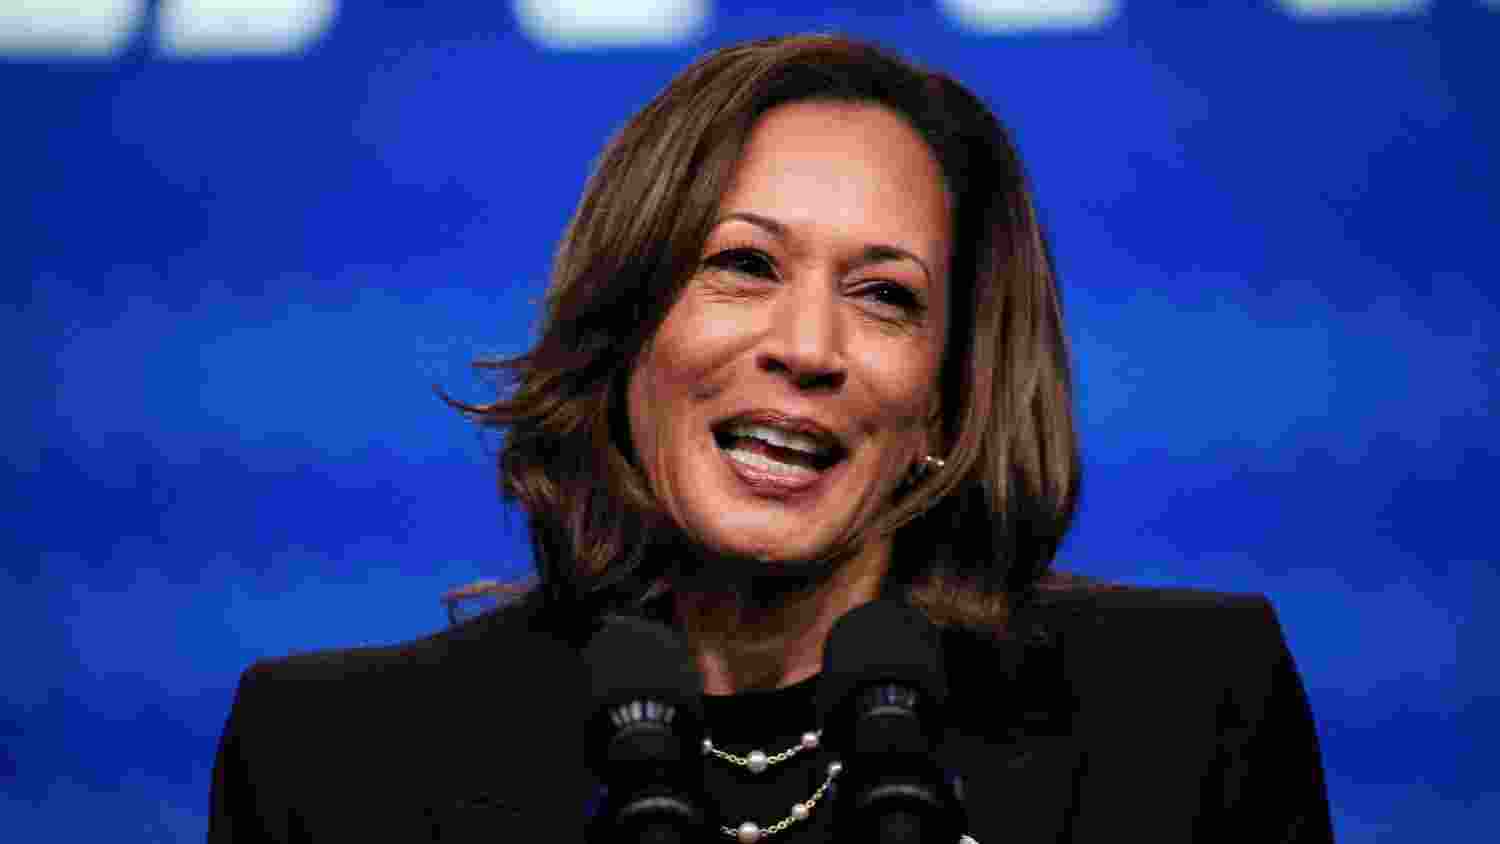 White House condemns racist, sexist attacks on Harris